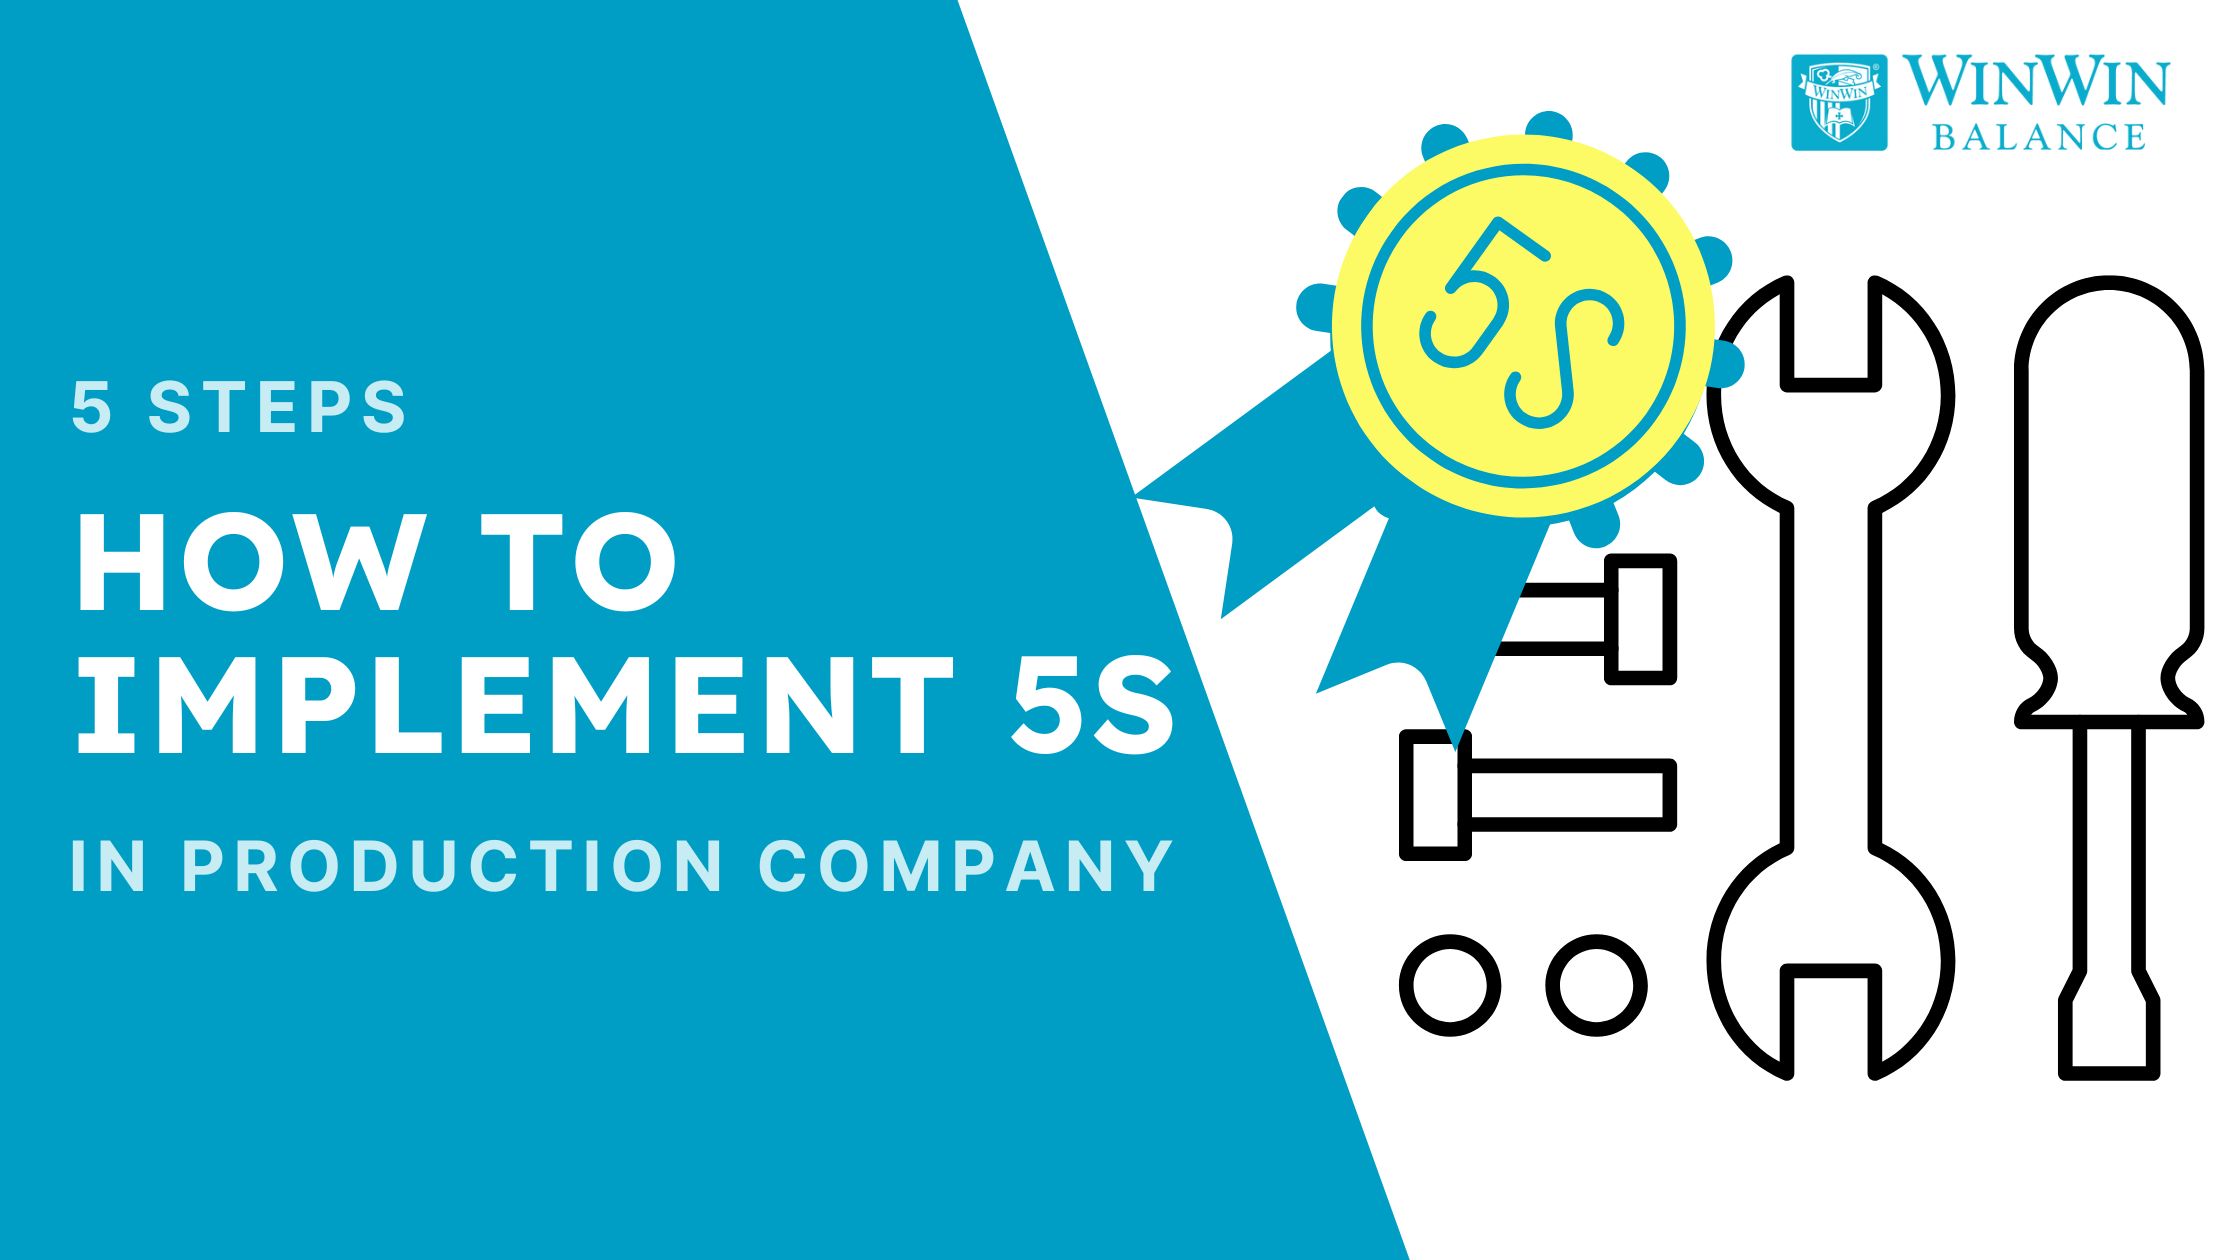 How to implement 5S in production company